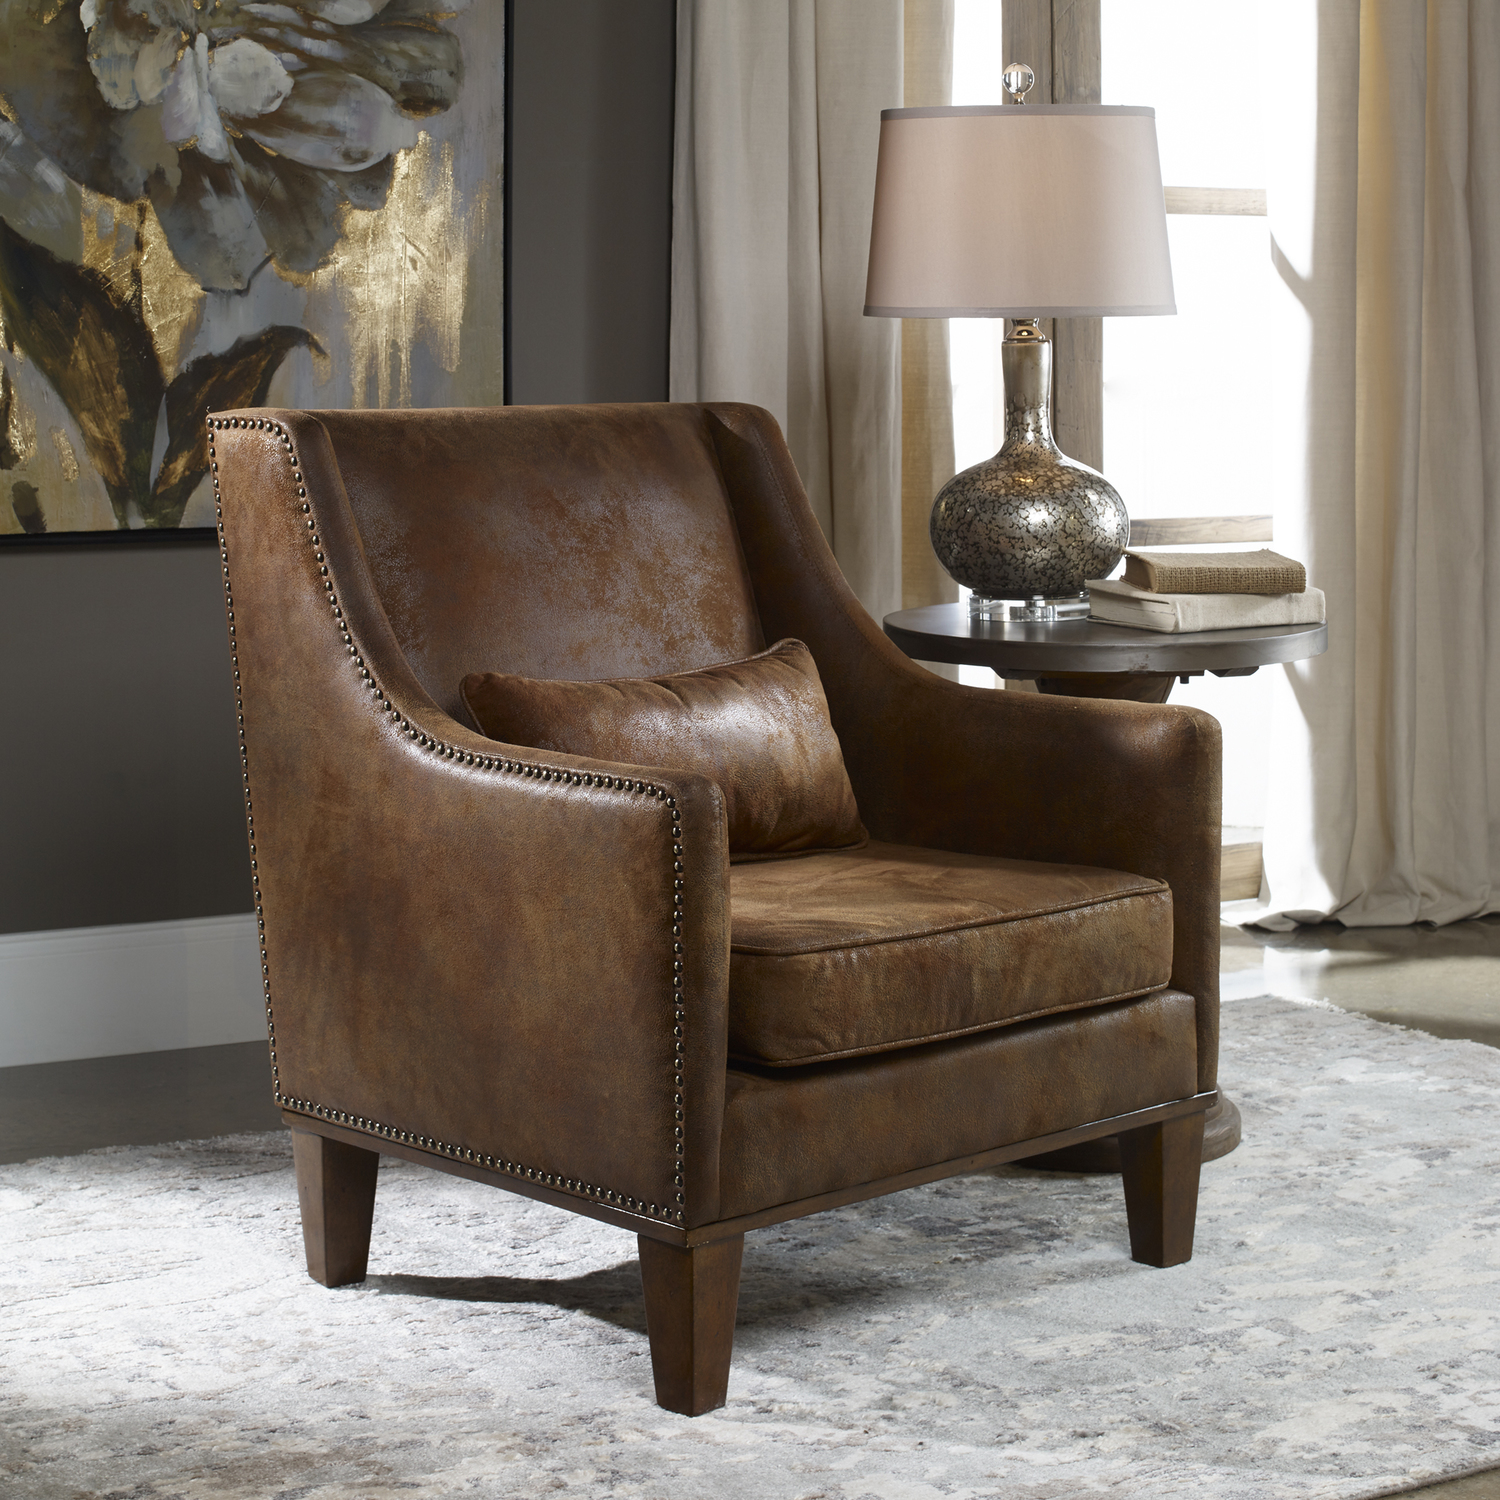 used lounge chairs for sale near me Uttermost  Accent Chairs & Armchairs Velvety Soft Fabric That Captures The Look Of Natural Tanned Leather. Antiqued Brass Nail Head Details, And Weathered Hickory-stained Legs And Base. Pillow Included. Matthew Williams